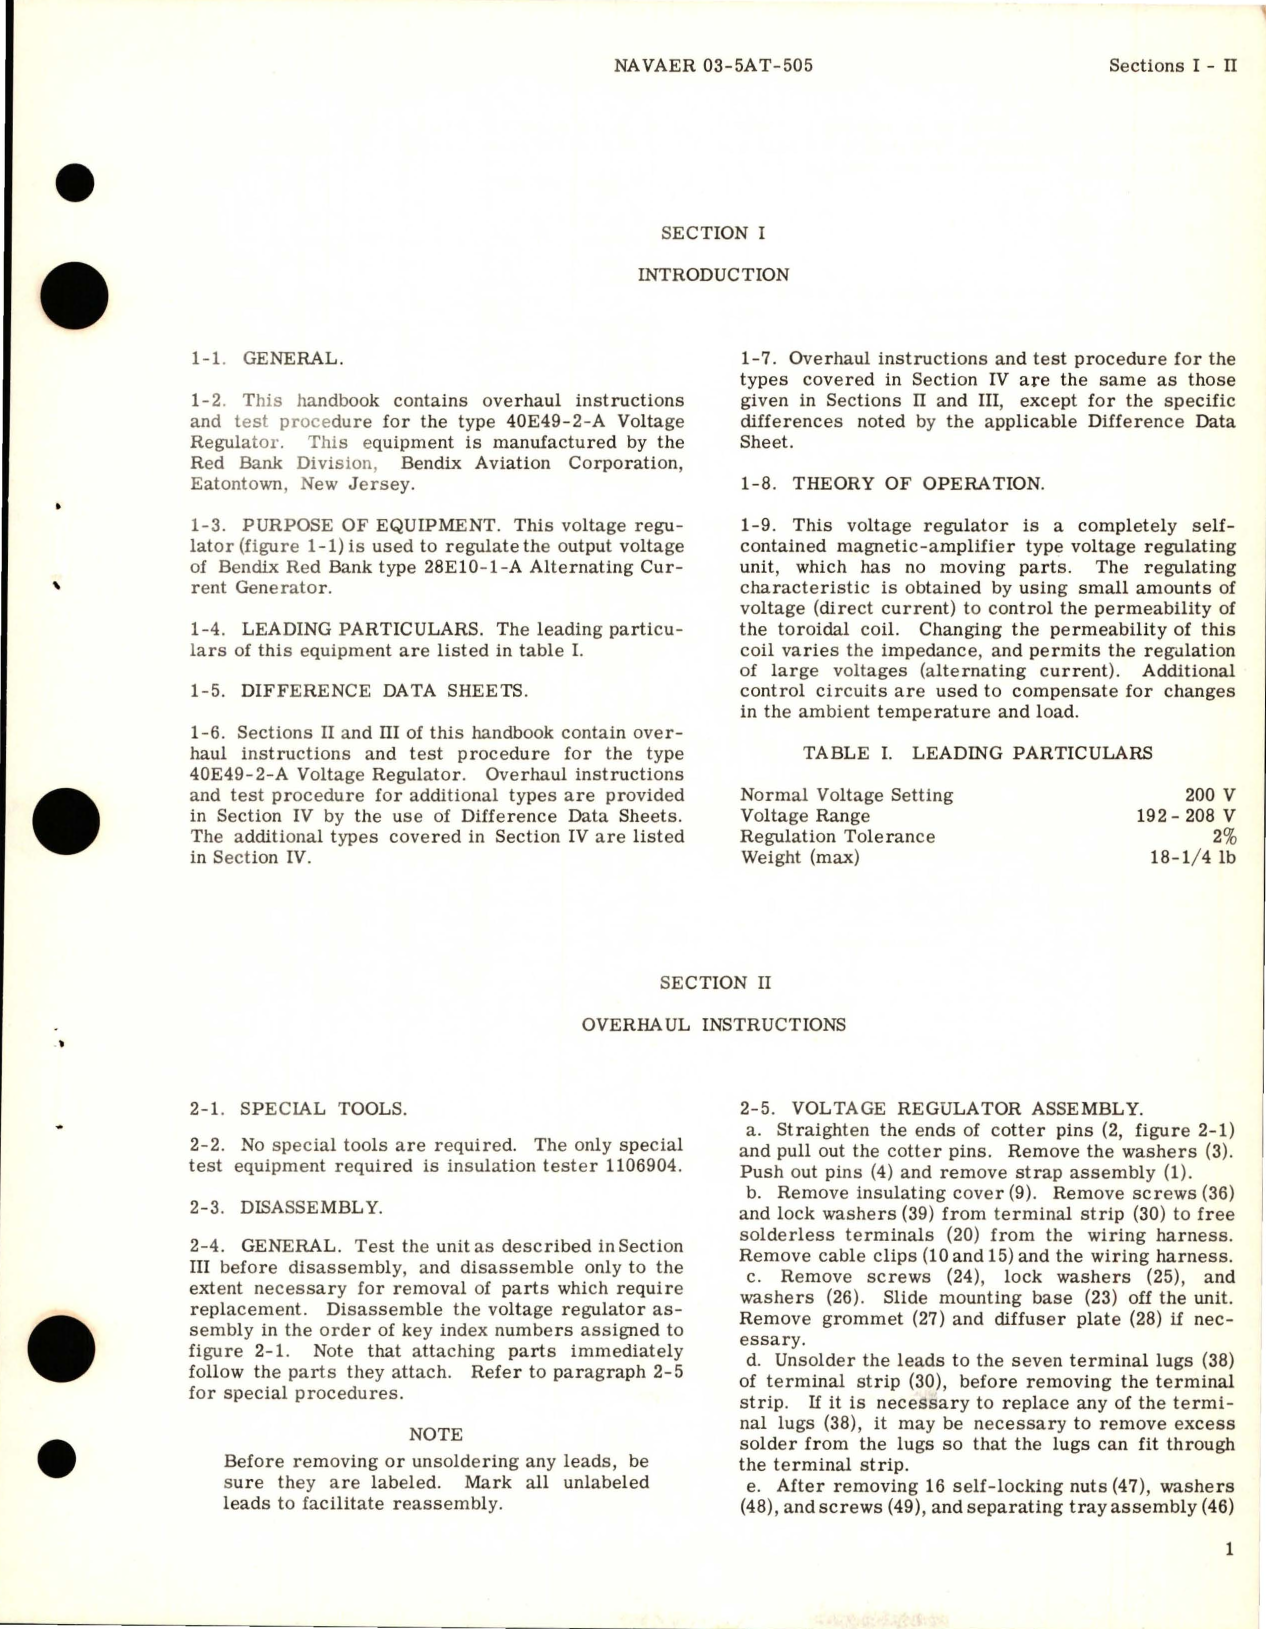 Sample page 5 from AirCorps Library document: Overhaul Instructions for Voltage Regulator 